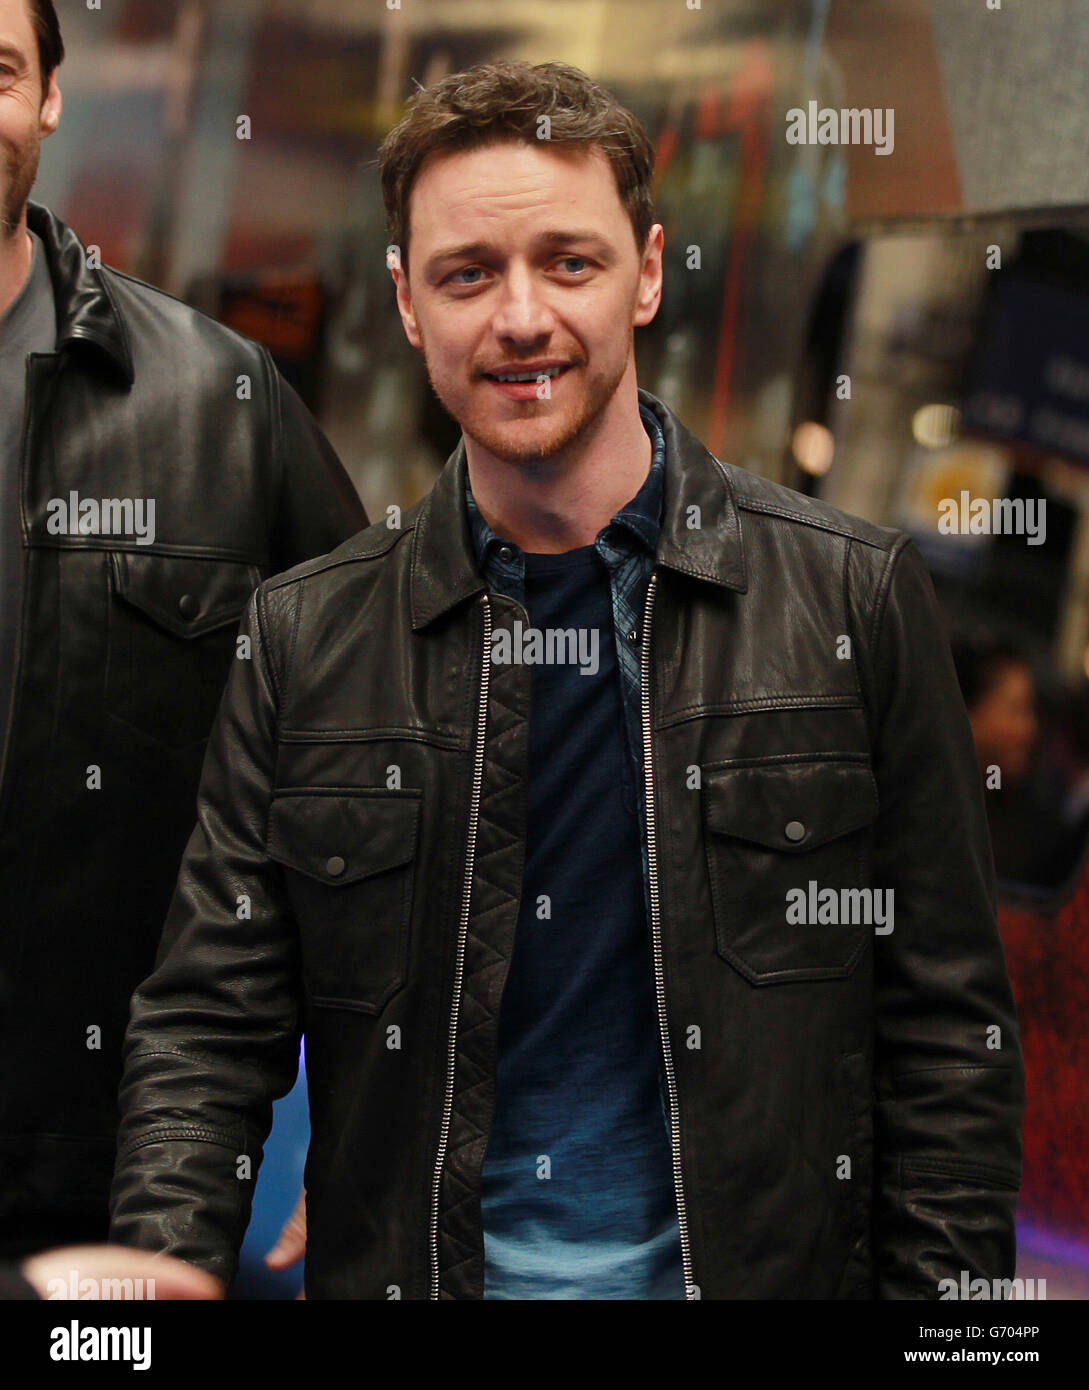 James McAvoy names a Virgin train at Euston station in London to celebrate Virgin Trains partnership with Twentieth Century Fox Film Corporation to be the official travel partner of X-MEN: Days of Future Past. Stock Photo